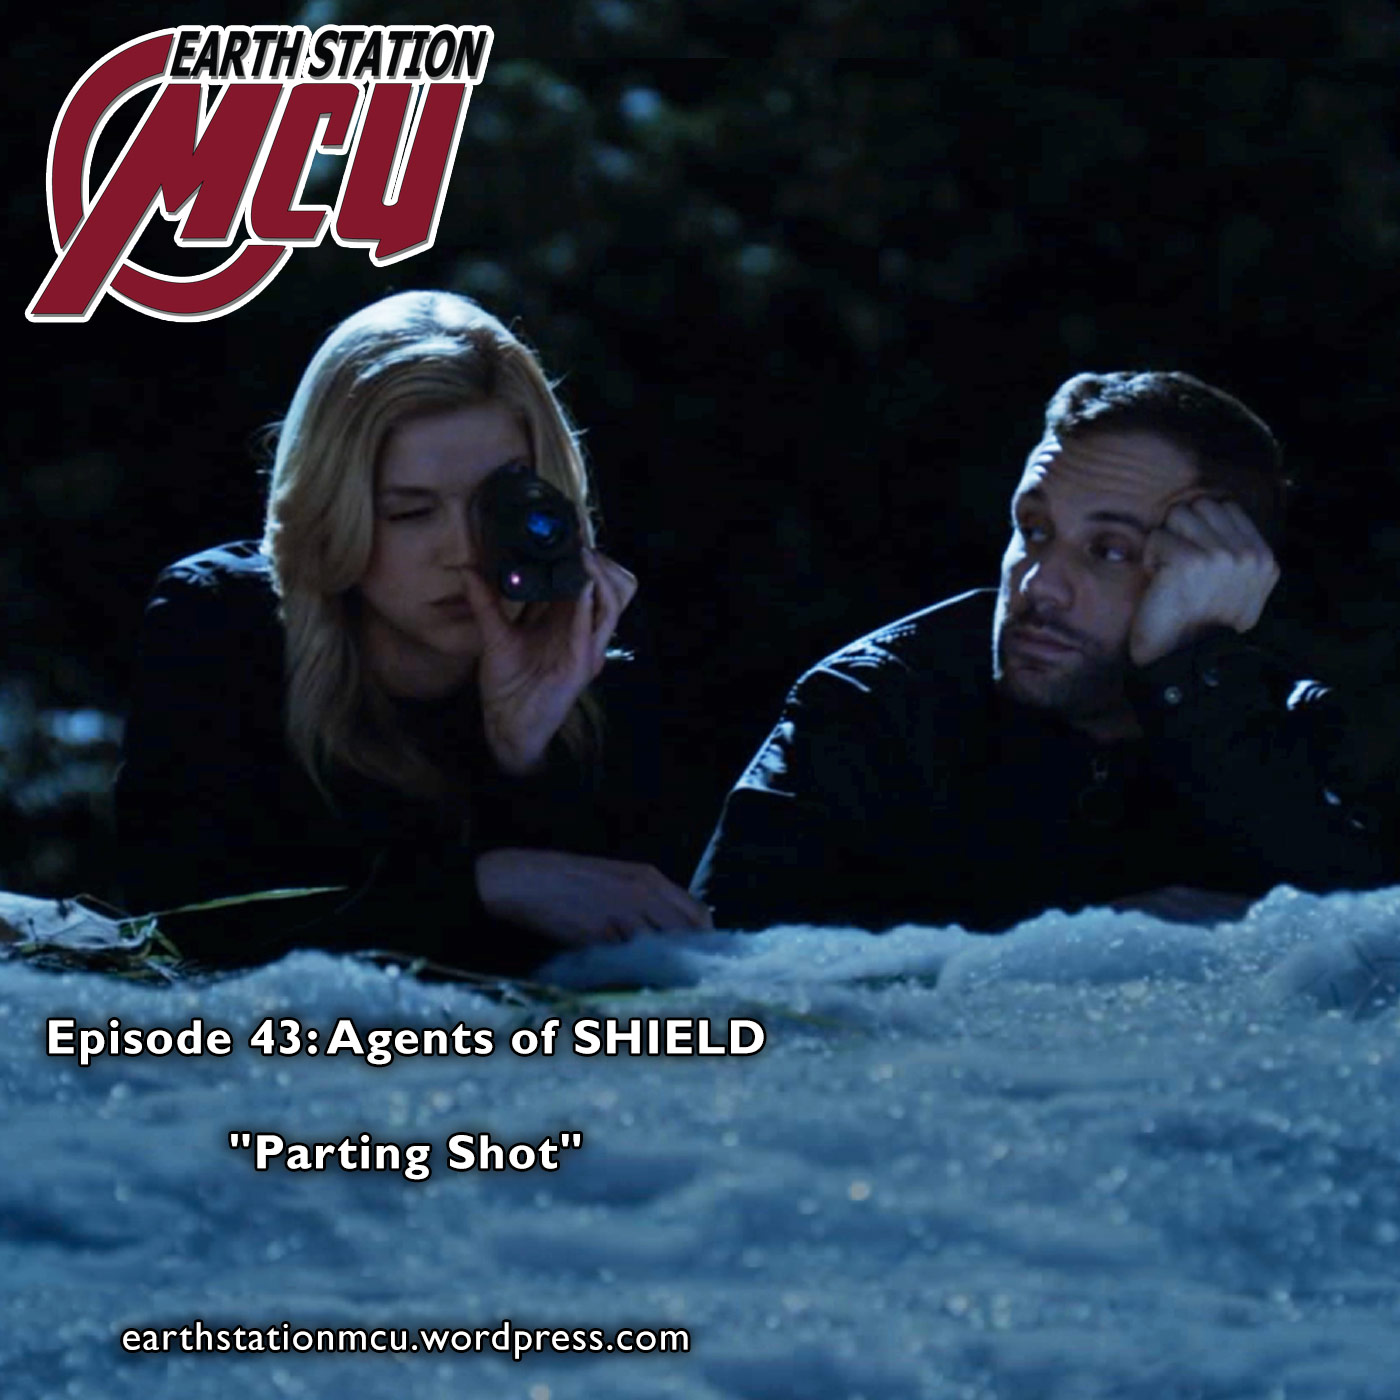 Earth Station MCU: Episode 43 - Agents of SHIELD ”Parting Shot”